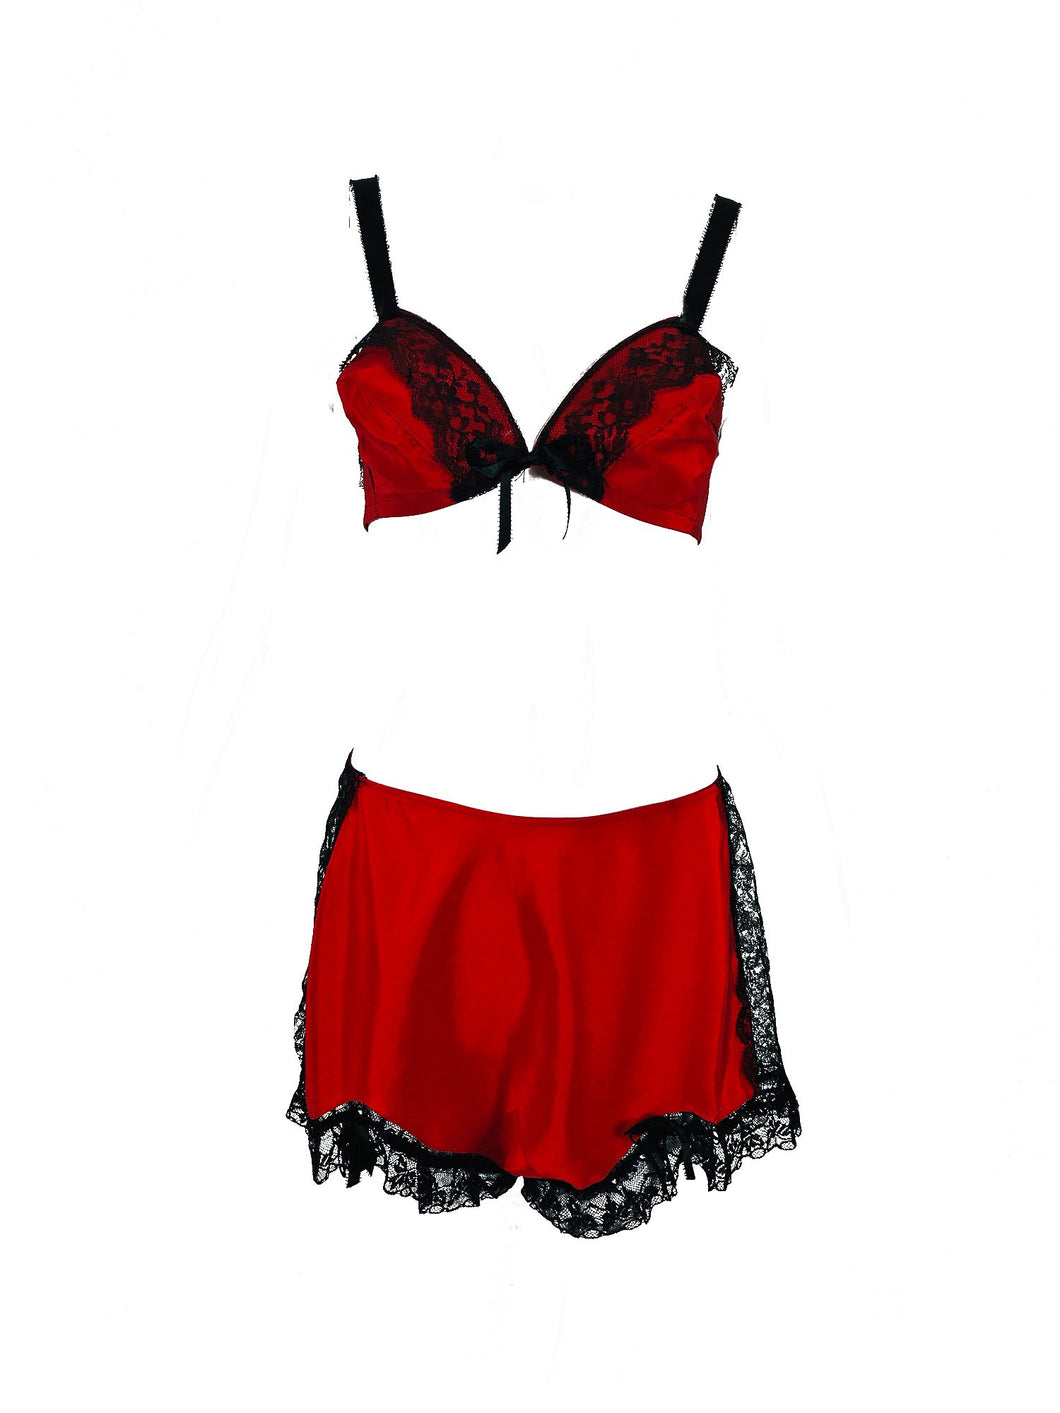 Lace Lingerie Sets To Buy Yourself This Valentine's Day